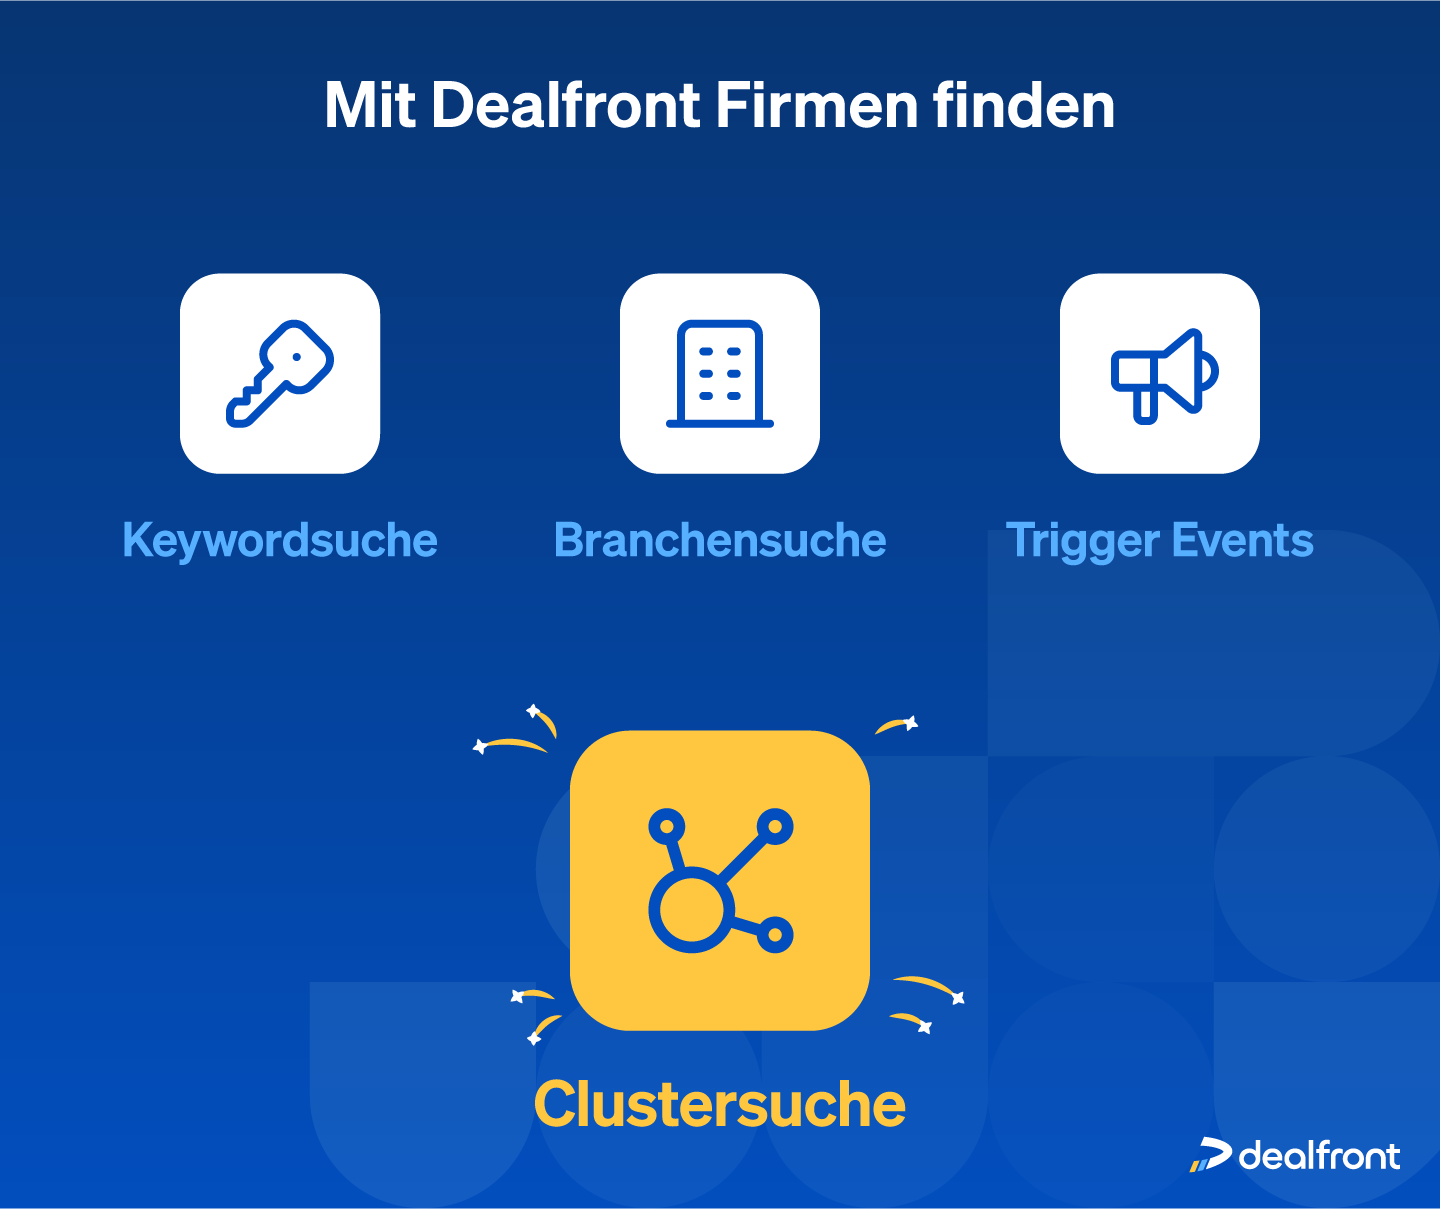 Cluster search in Dealfront